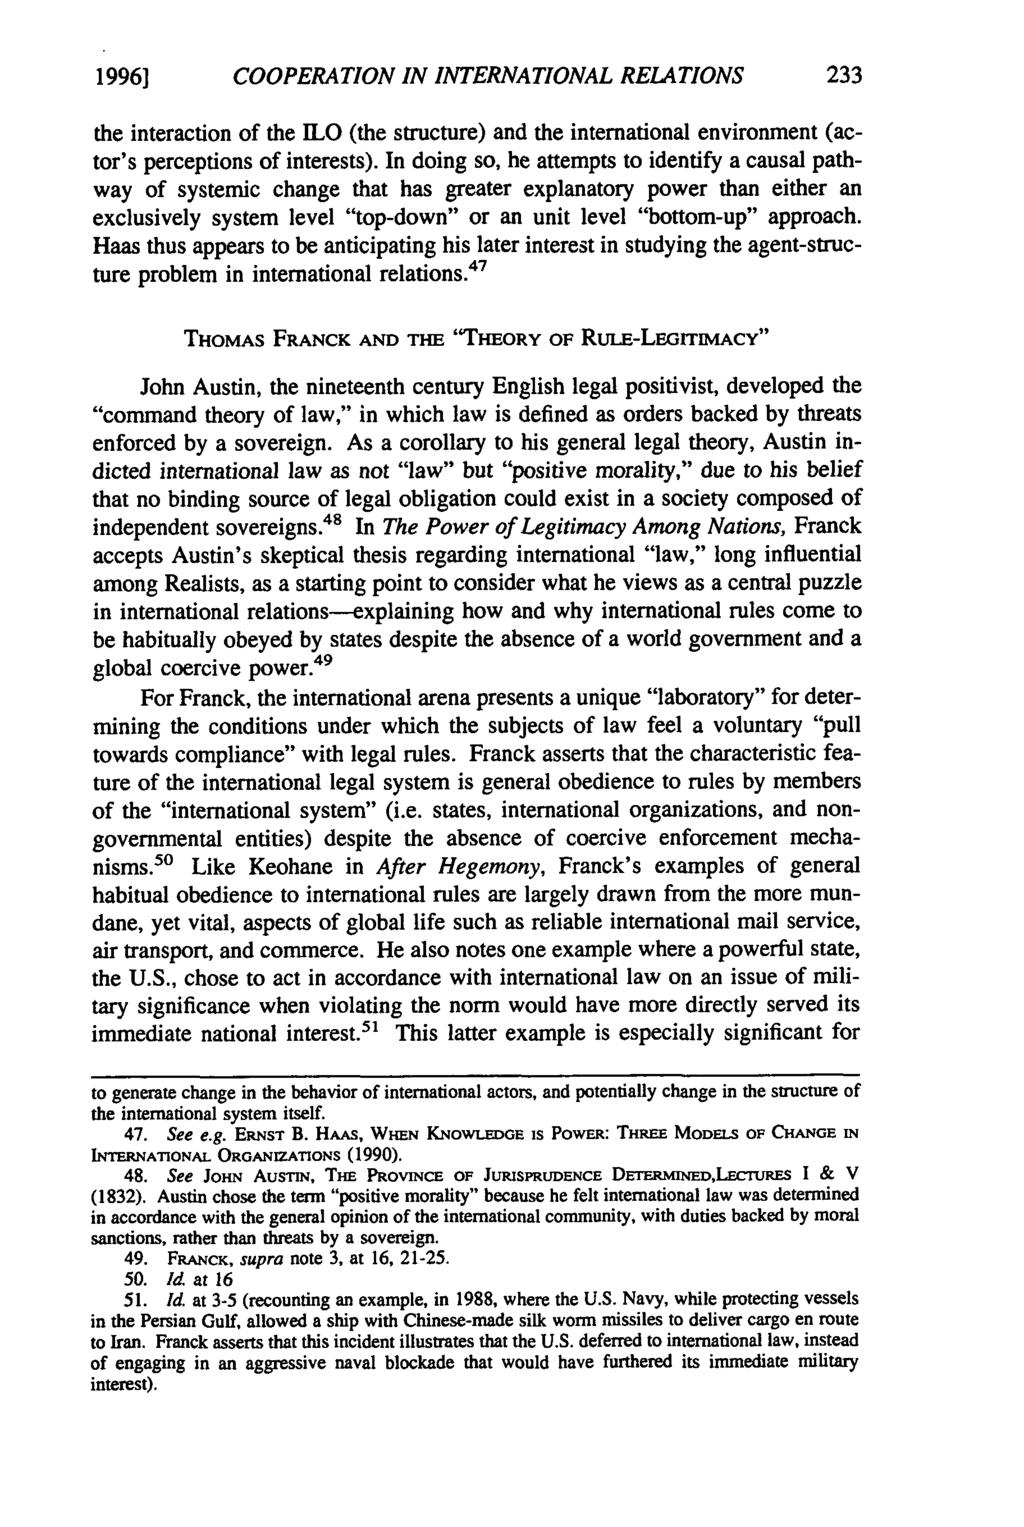 1996] COOPERATION IN INTERNATIONAL RELATIONS the interaction of the 1LO (the structure) and the international environment (actor's perceptions of interests).